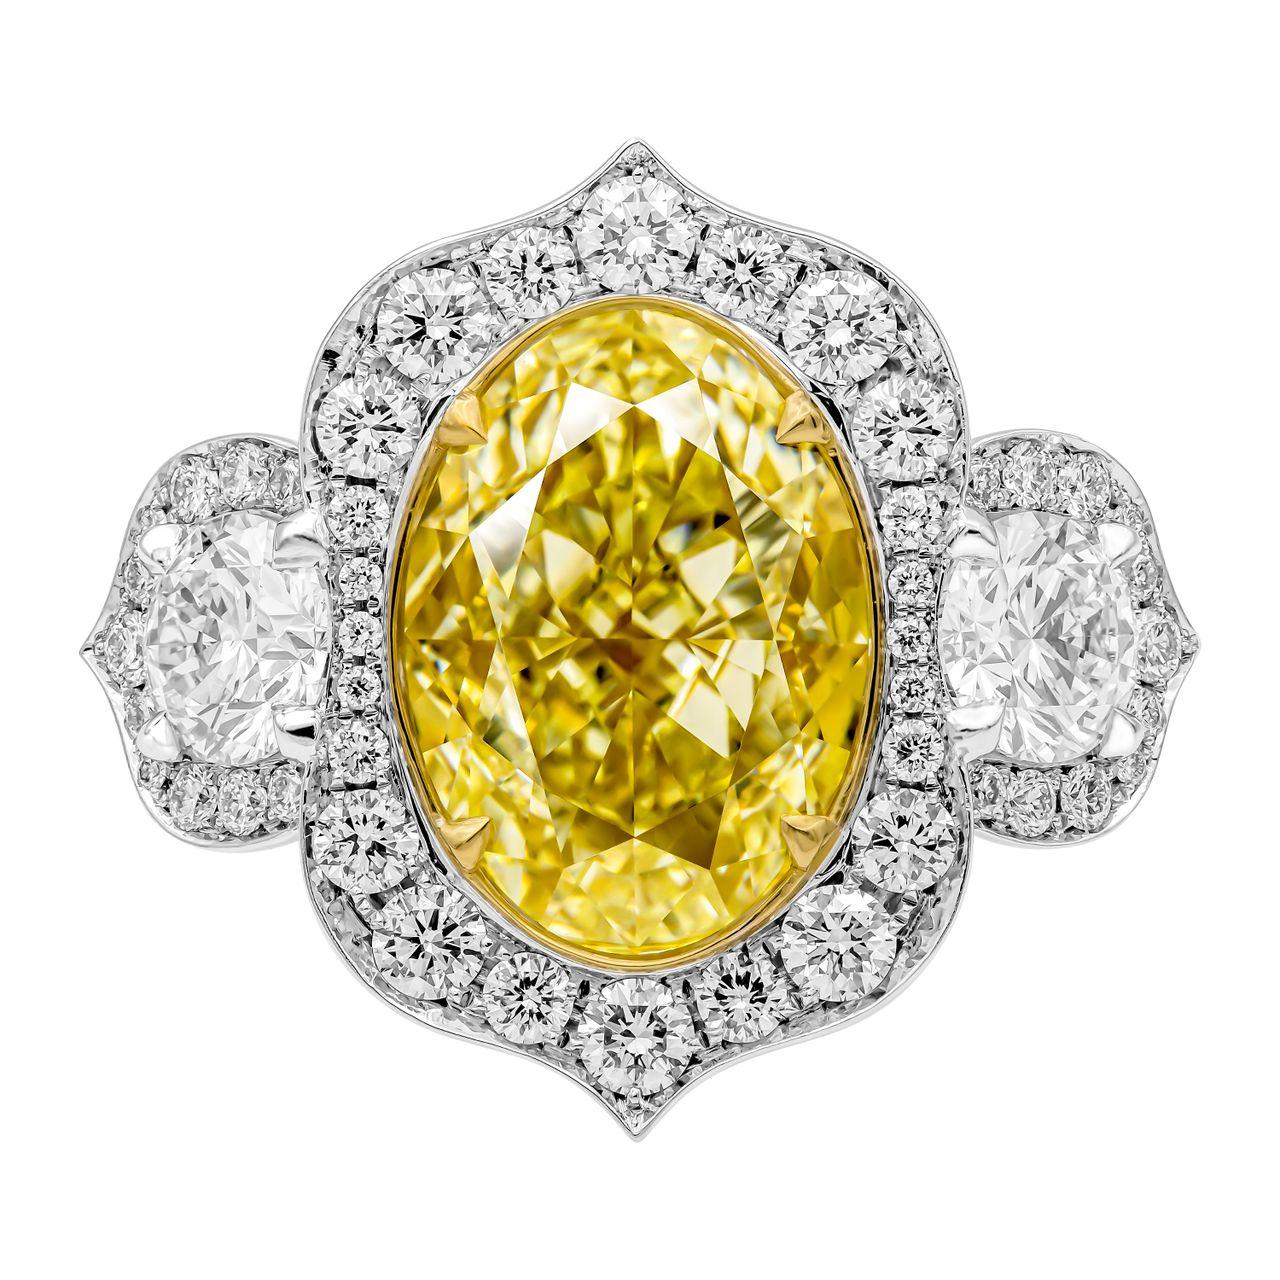 Aladdin Style 3 stone ring 
Crafted in Platinum & 18K Yellow Gold,
Center: 6.02ct Natural Fancy Light Yellow Even VS1 Oval Shape Diamond GIA#5221505250
2 side round stones: 0.73ct & 0.70ct (Totaling 1.43ct) 
Diamond cathedral shank and fully